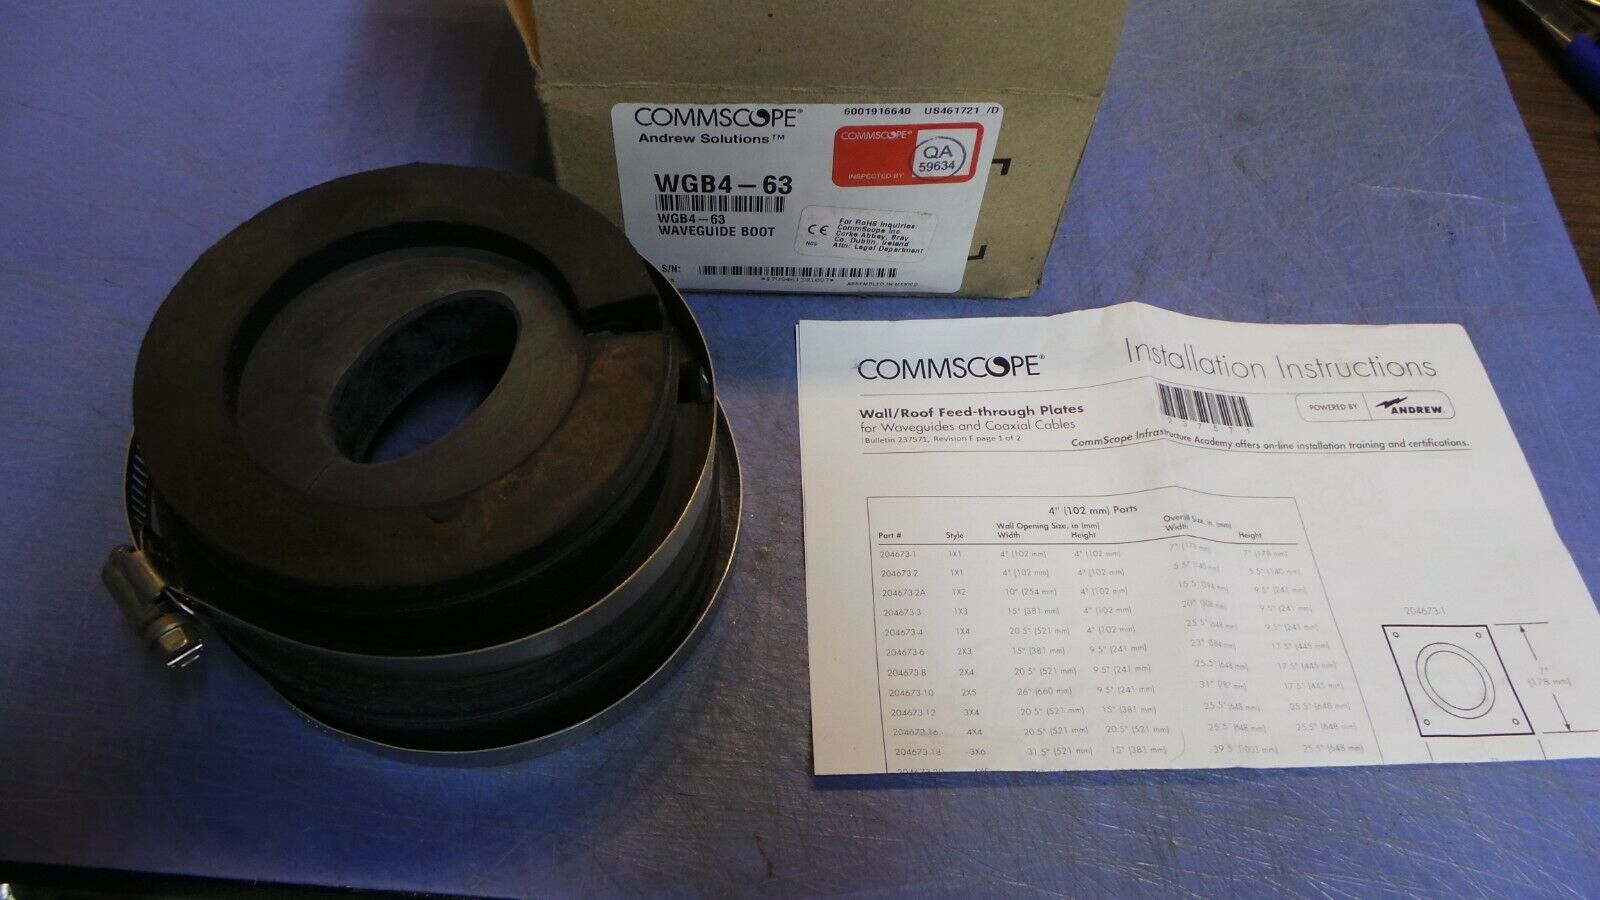 1 – COMMSCOPE Andrew Solutions WGB4-63 4” Entry Boot for EW63 Cable. NEW